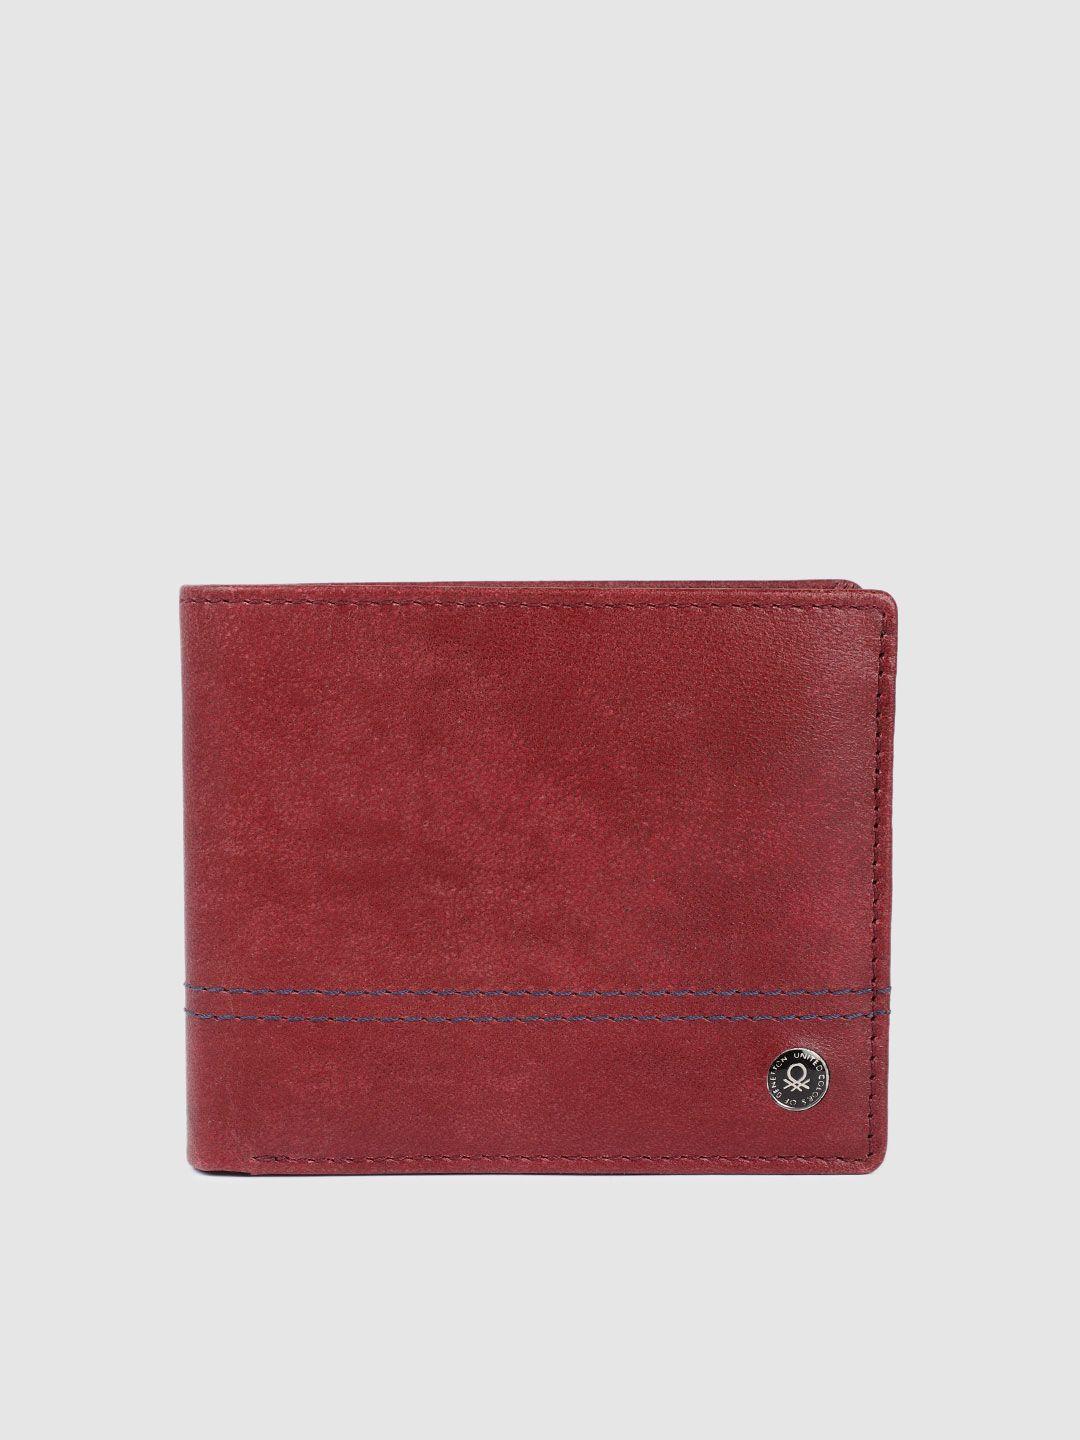 united colors of benetton men textured leather two fold wallet